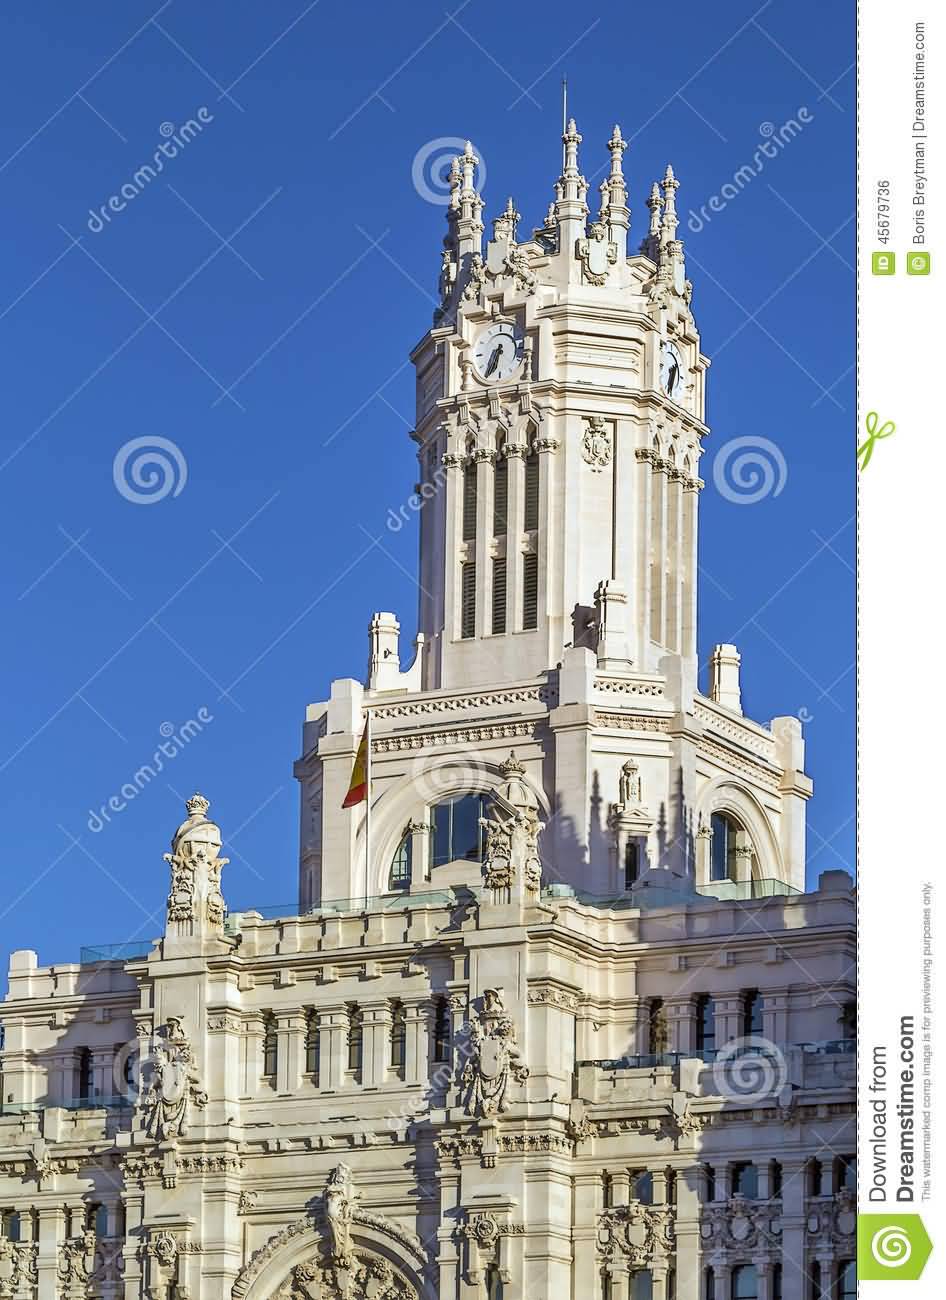 Tower Of Cybele Palace In Madrid, Spain